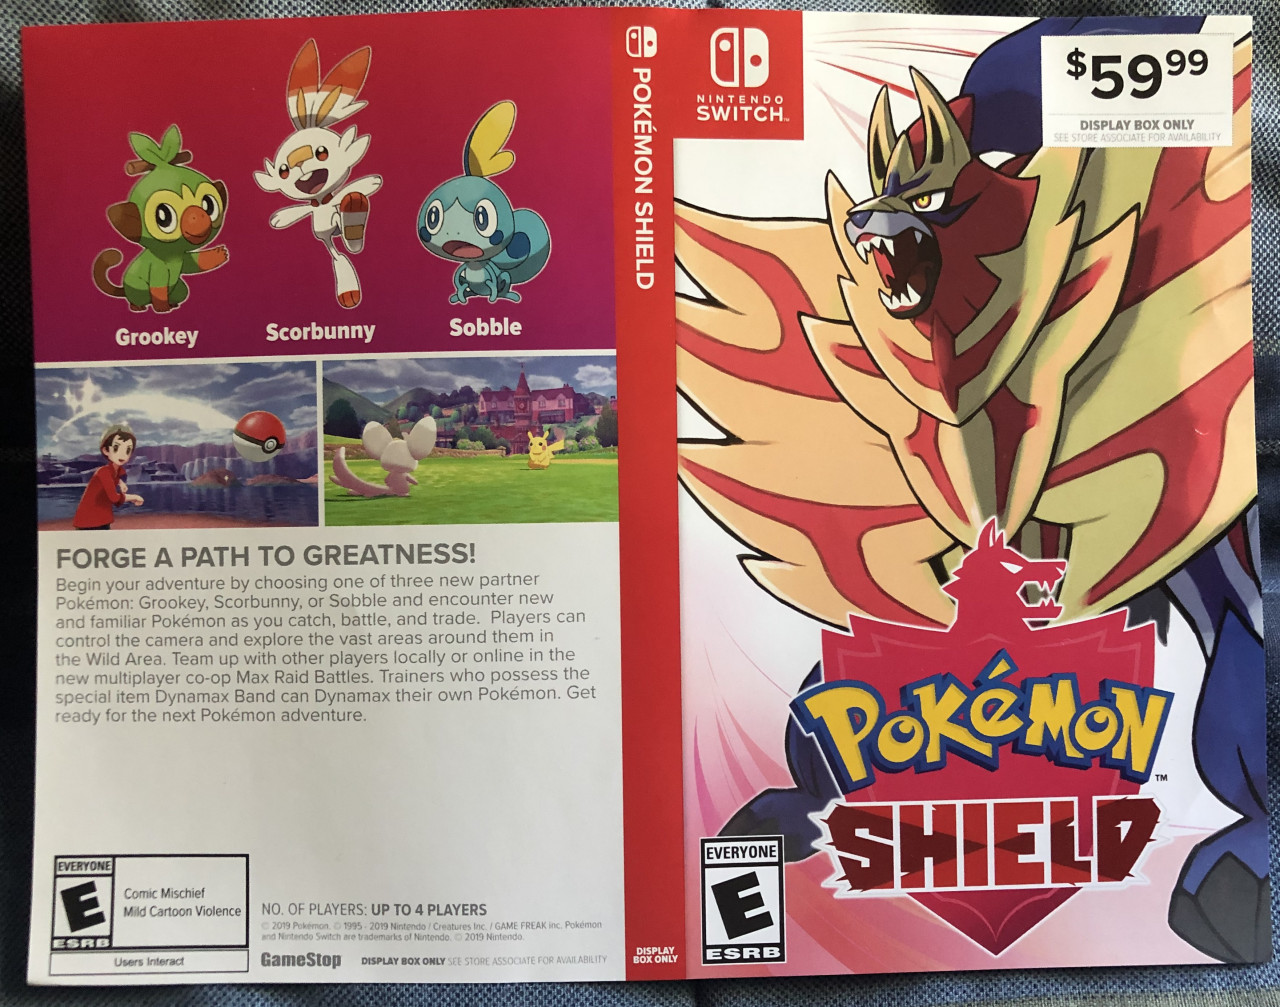 NintendoSoup on X: Pokemon Sword And Shield Guidebook Suggests